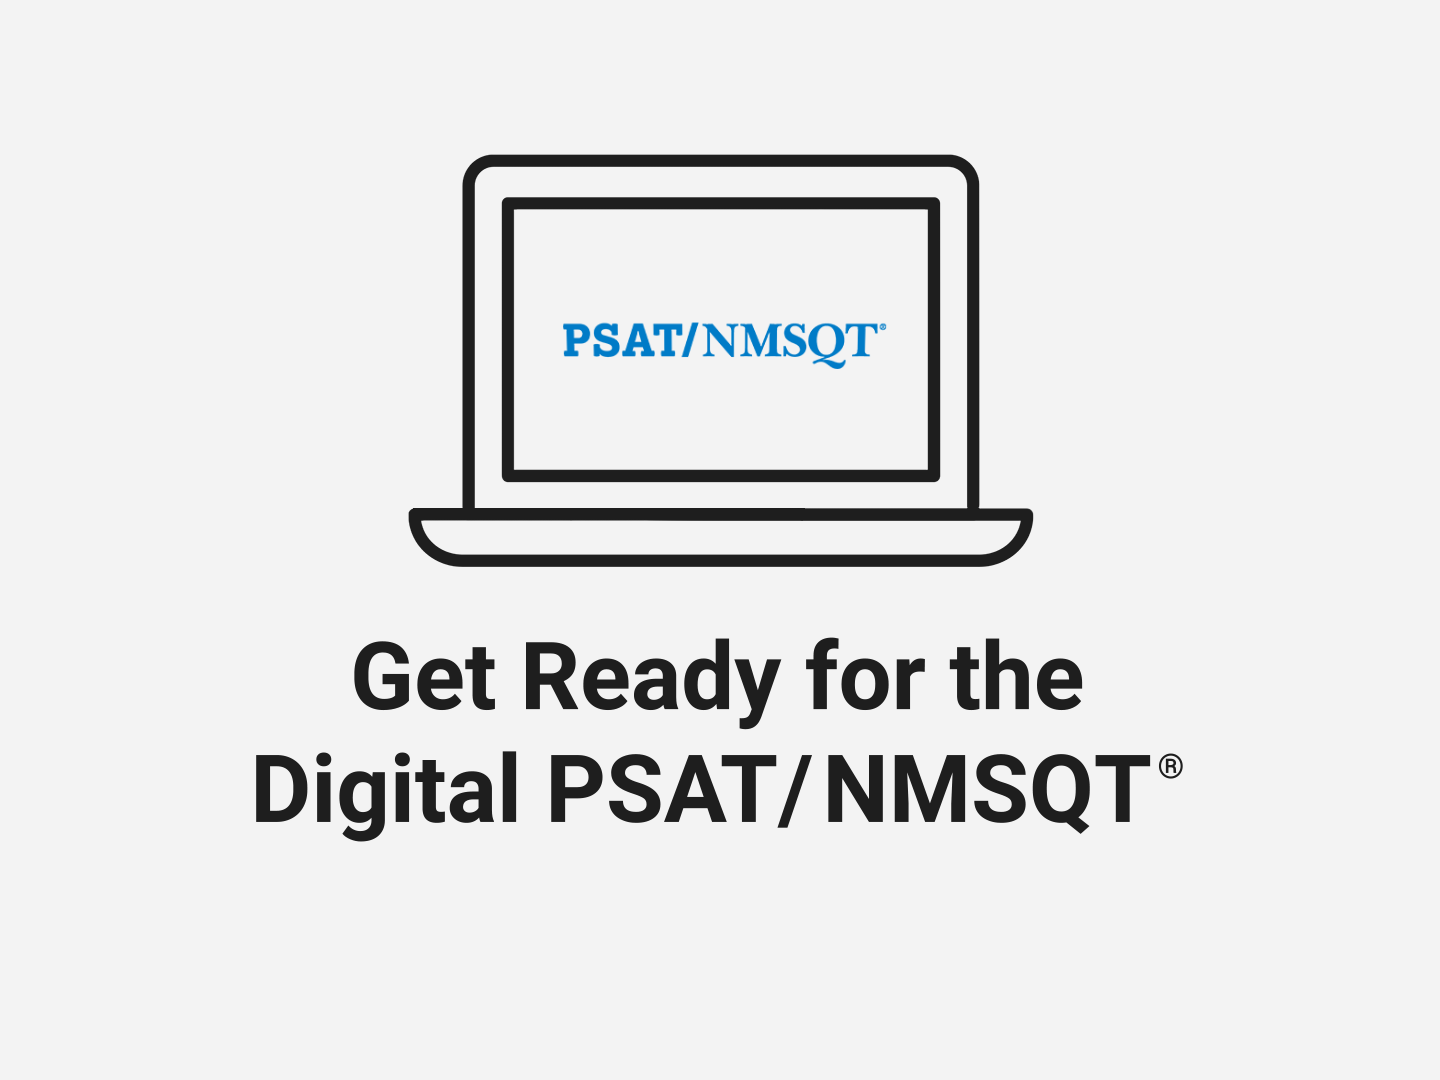 placecard with illustration of laptop with text "Get Ready for the Digital PSAT/NMSQT"